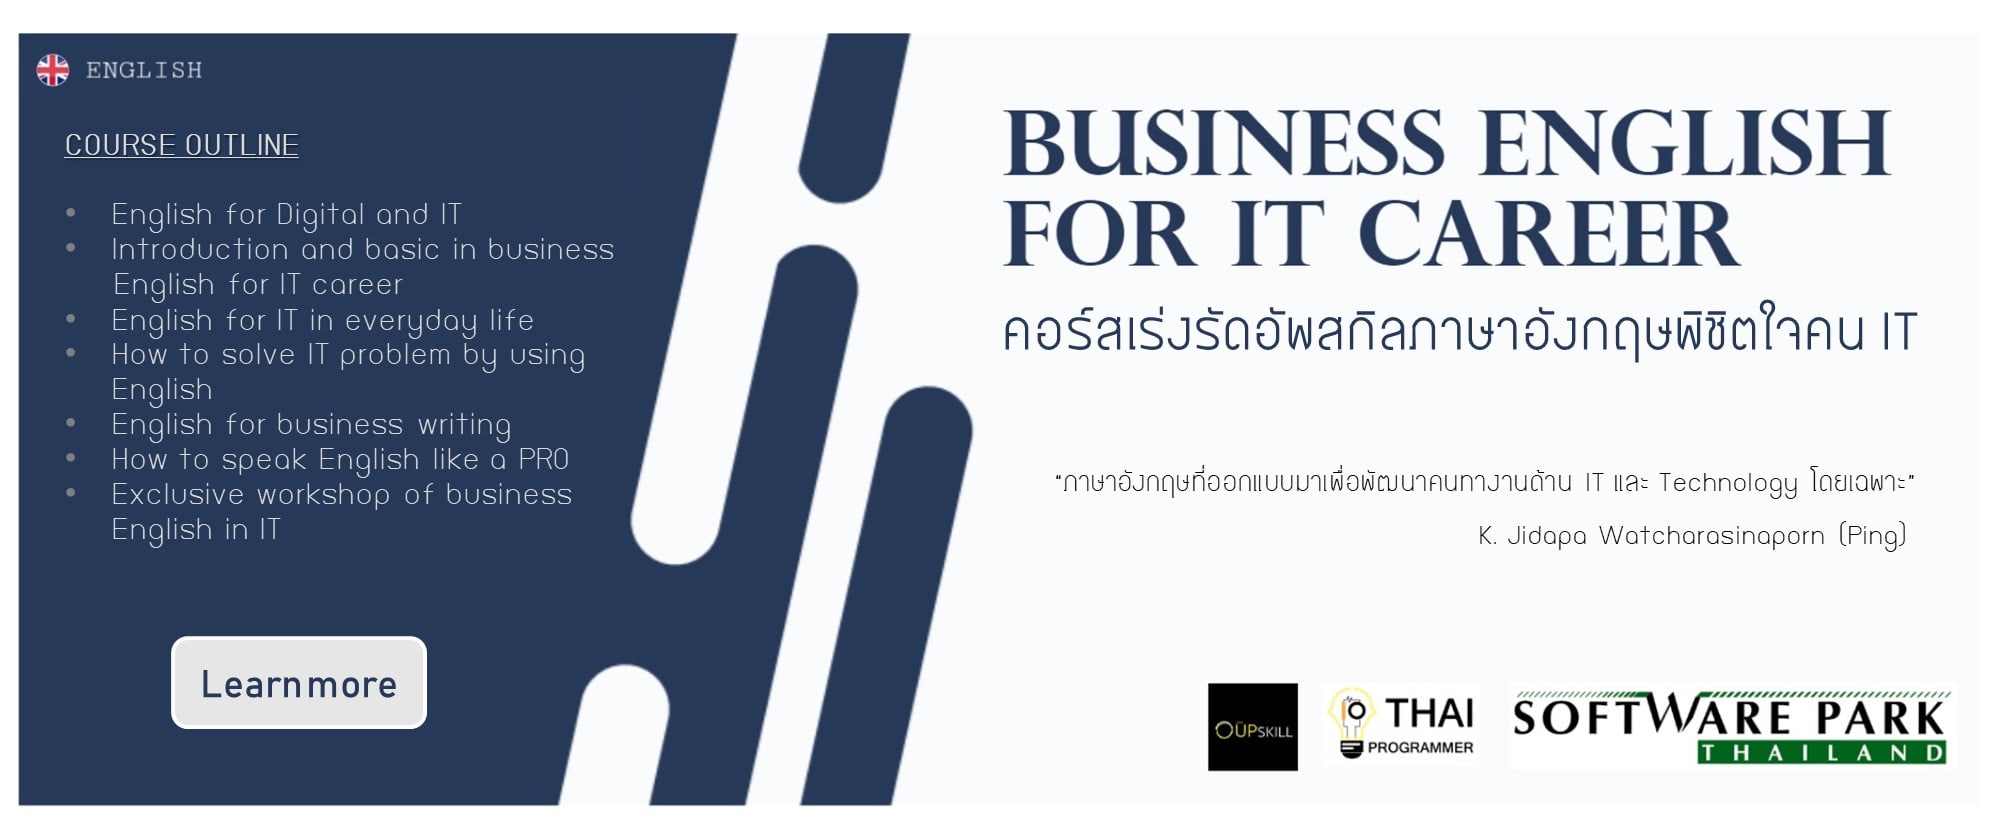 BUSINESS ENGLISH for IT Career ENG01